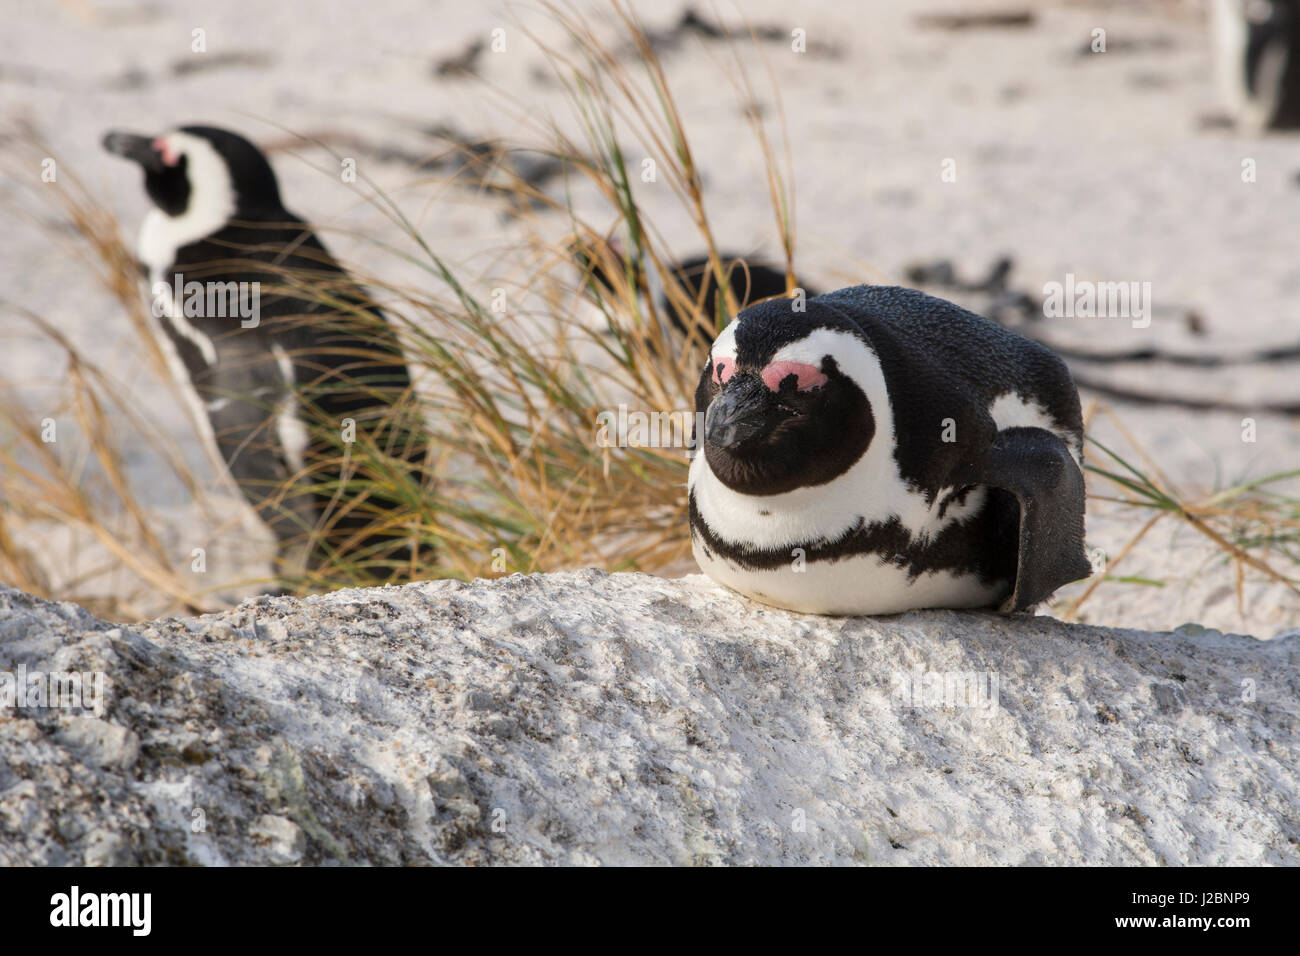 South Africa, Cape Town, Simon's Town, Table Mountain National Park, Boulders Beach. Colony of endangered African Penguins along False Bay at Foxy Beach. Stock Photo